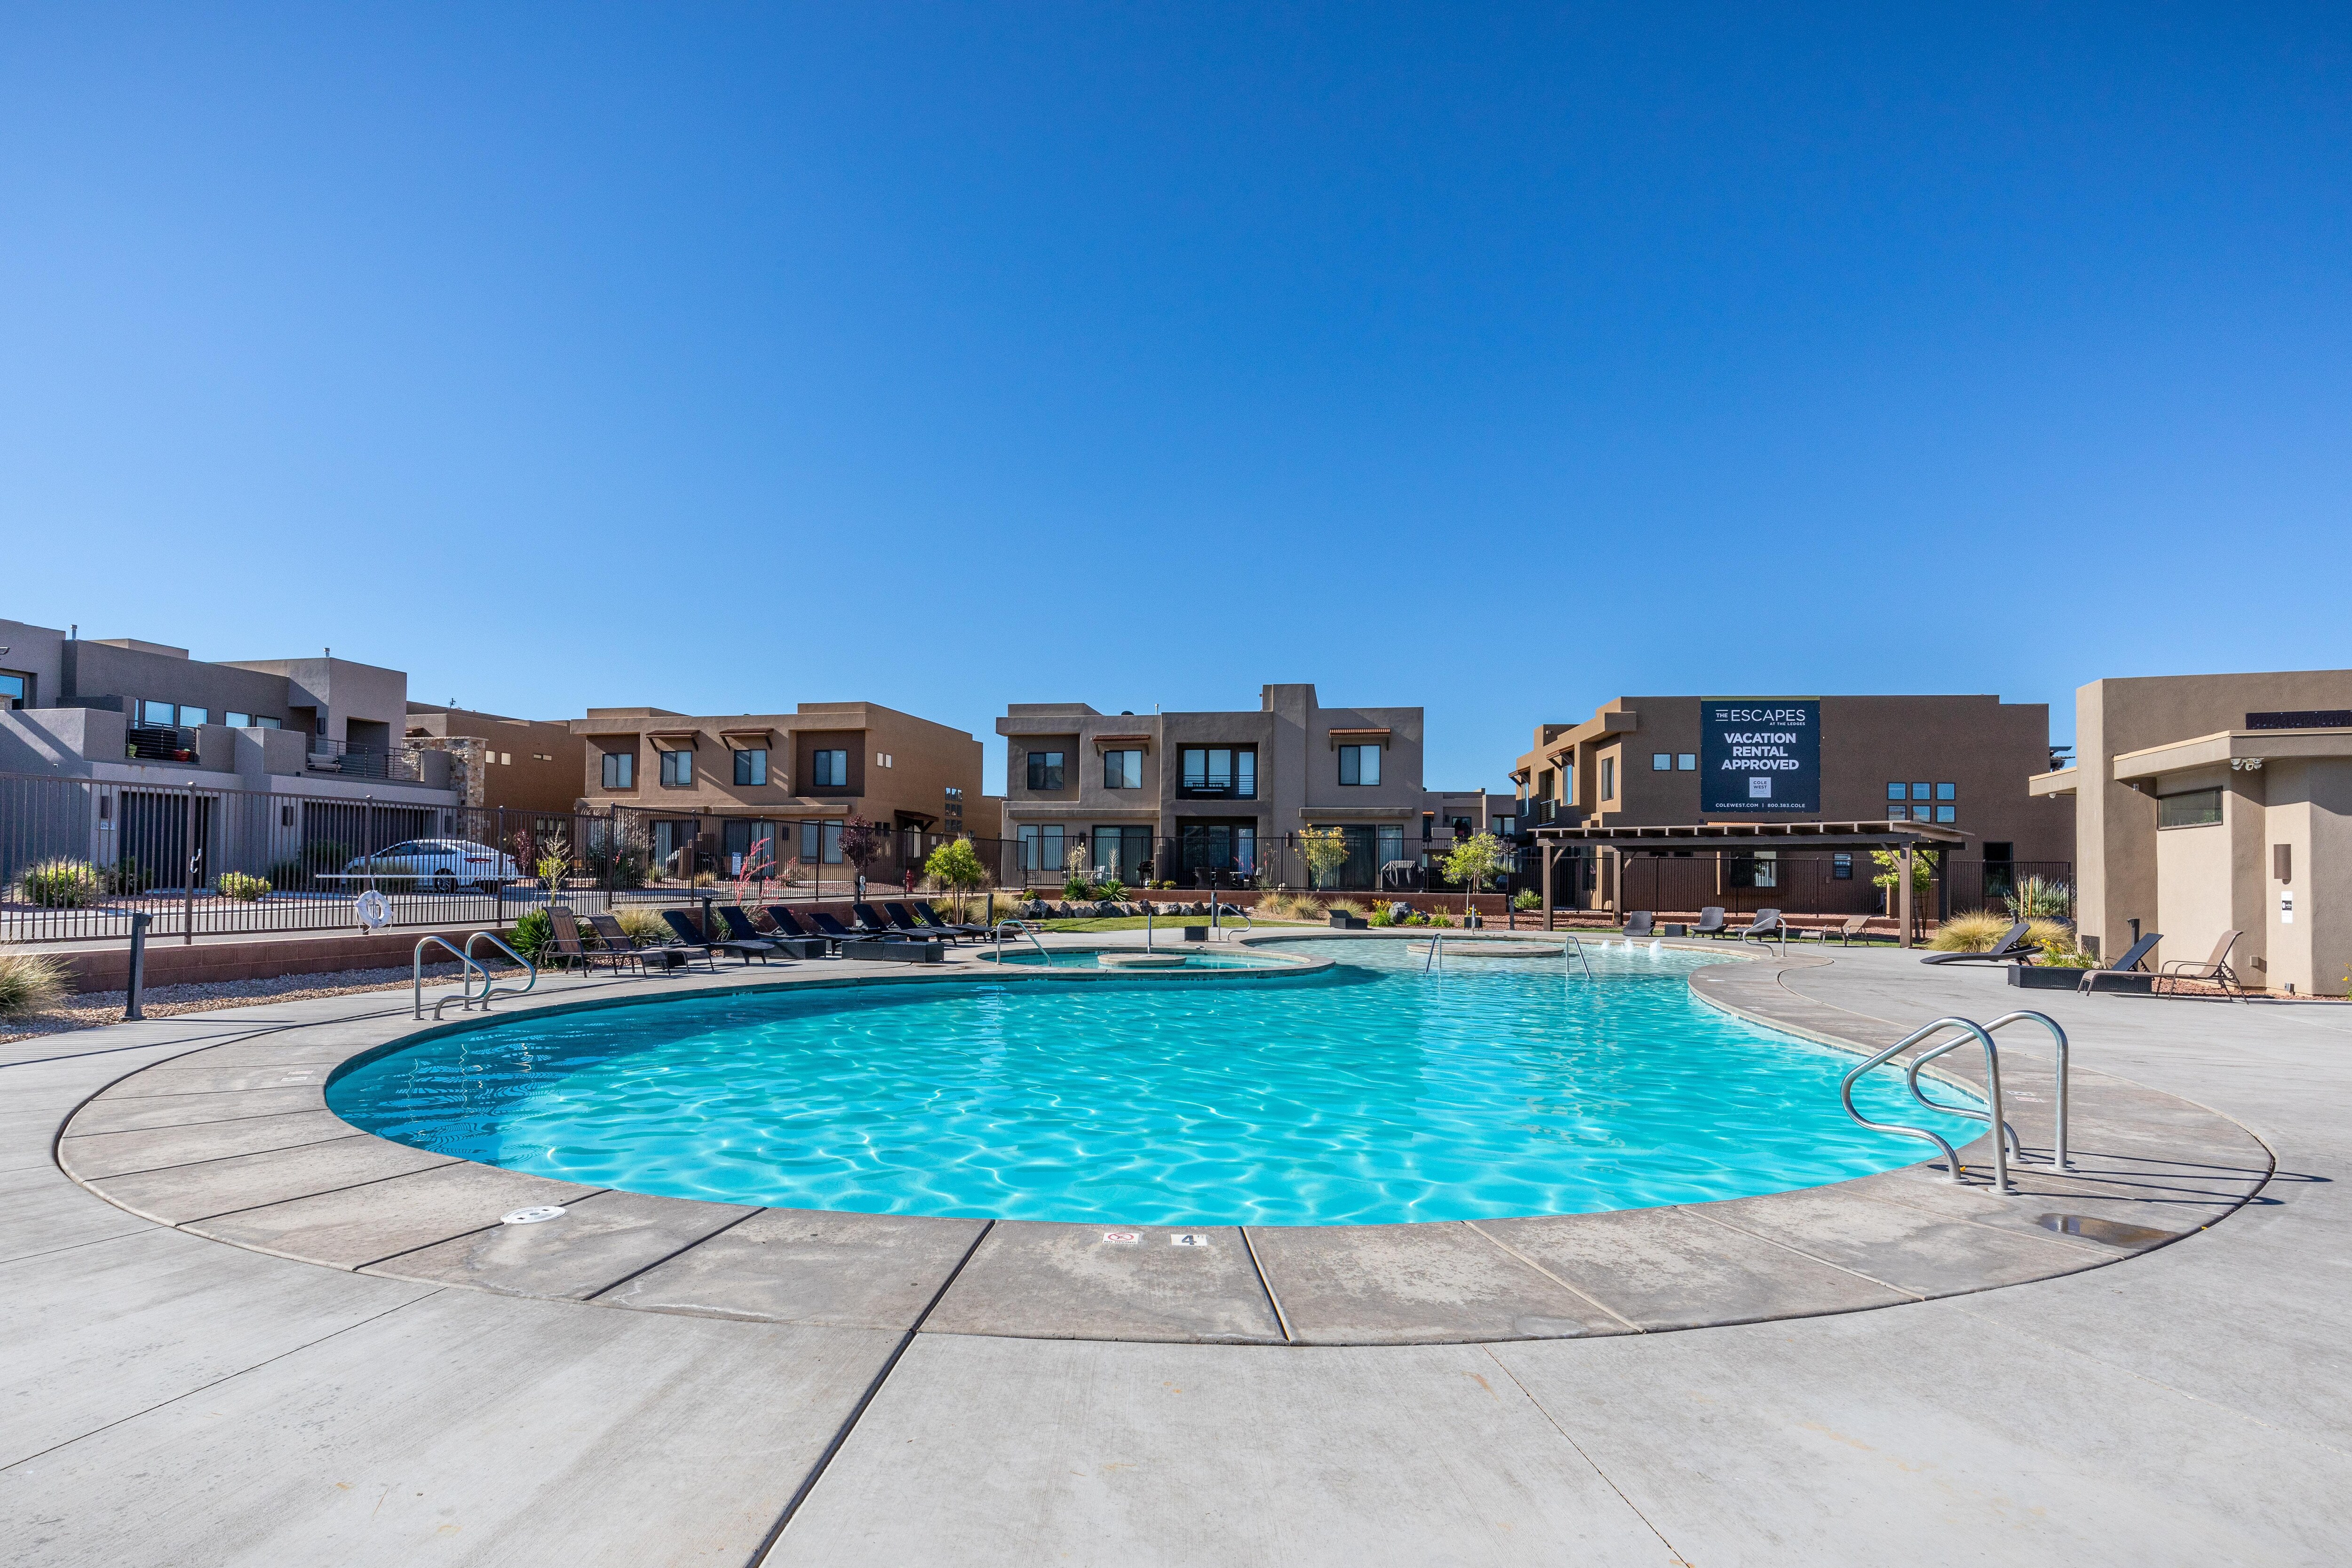 The pool and hot tub for amenity 1 are heated year-round and guests receive complimentary access when staying in our rental units.